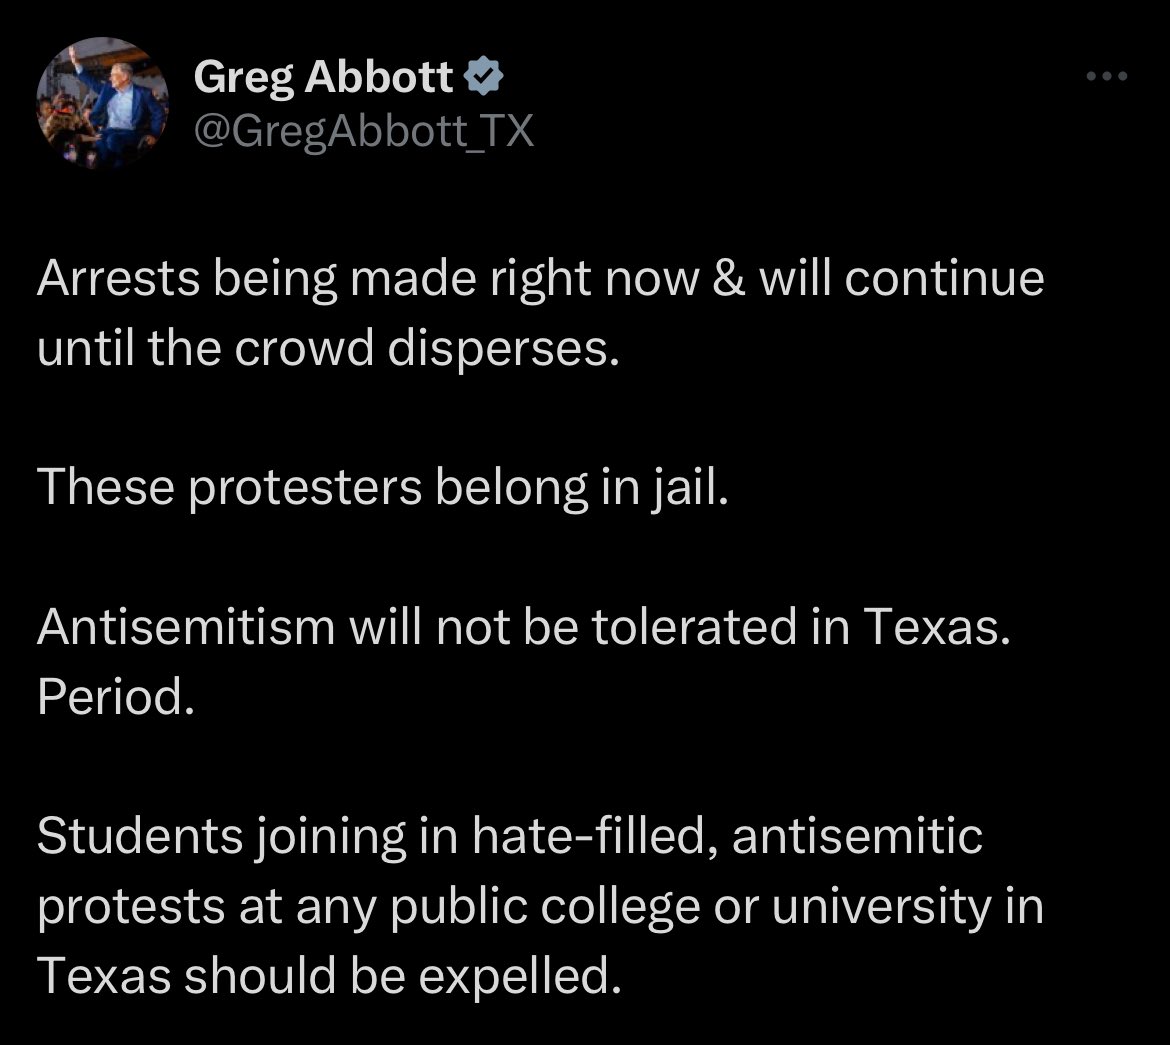 Anti white rhetoric is part of these universities curriculum and you never see a reaction like this from these conservative governors. The second it’s about the “chosen people” it’s hate speech and they’re arresting people for it. This is why I can’t really take these people